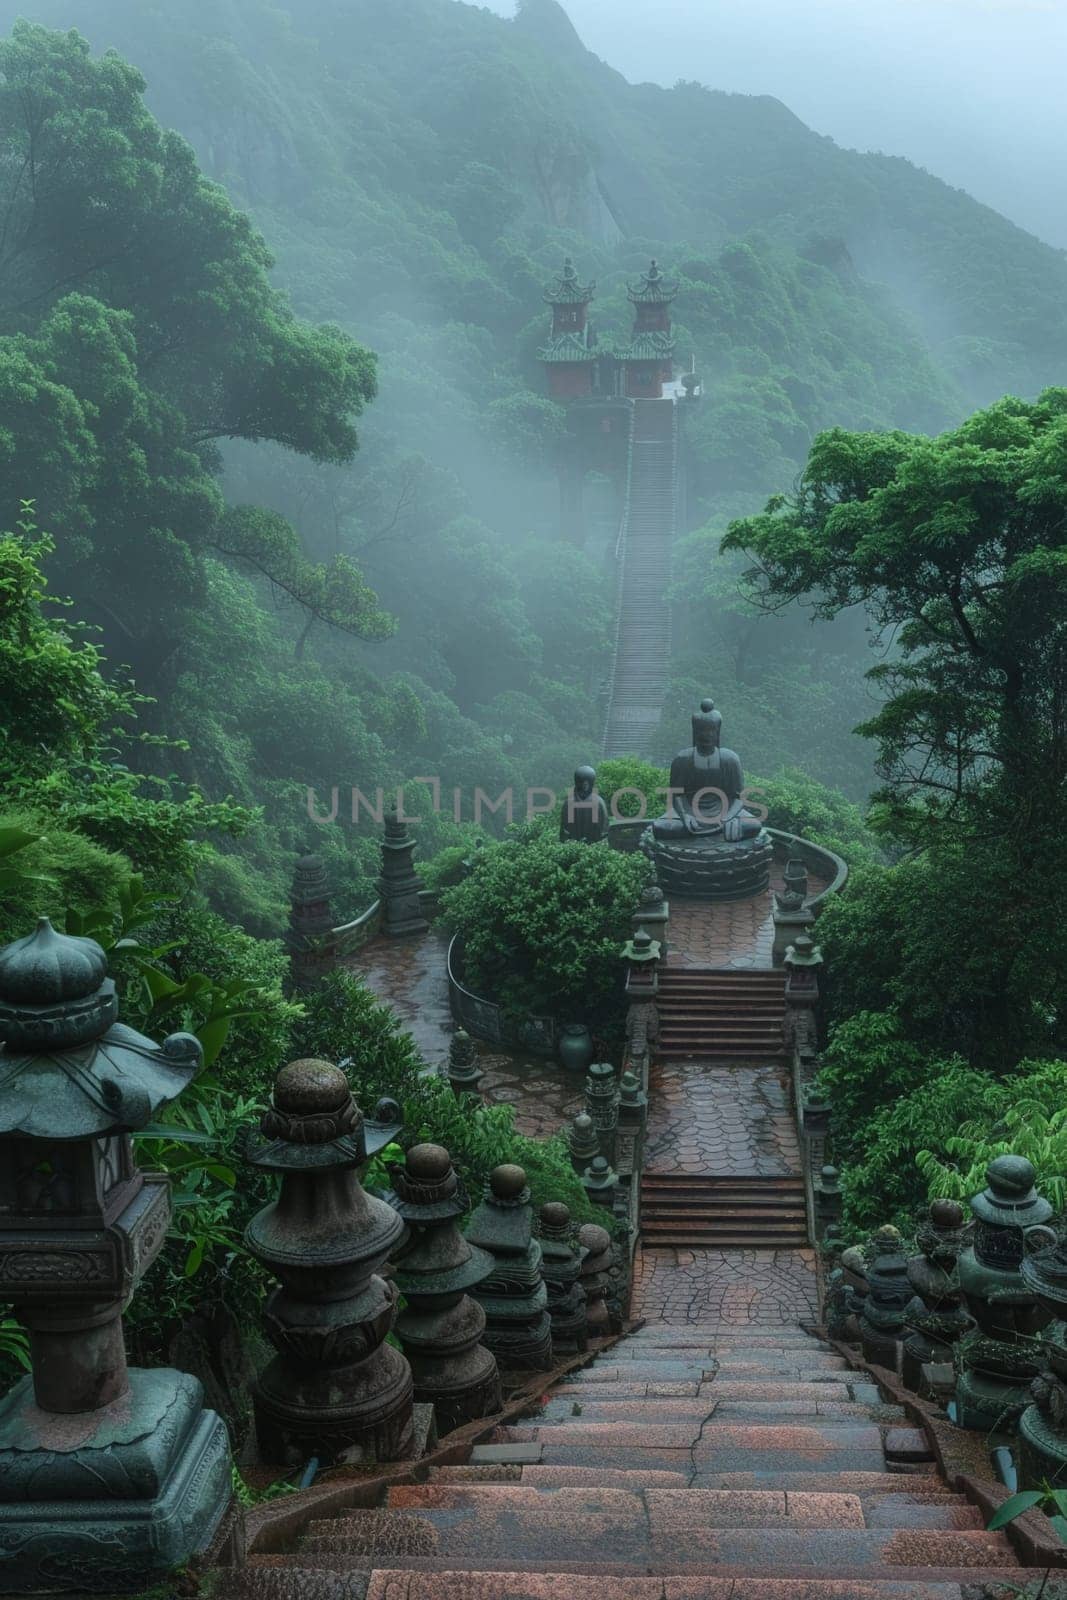 Bodhisattva Statues in Misty Mountain Temples, The figures blur into the mist, embodying compassion and the path to enlightenment.